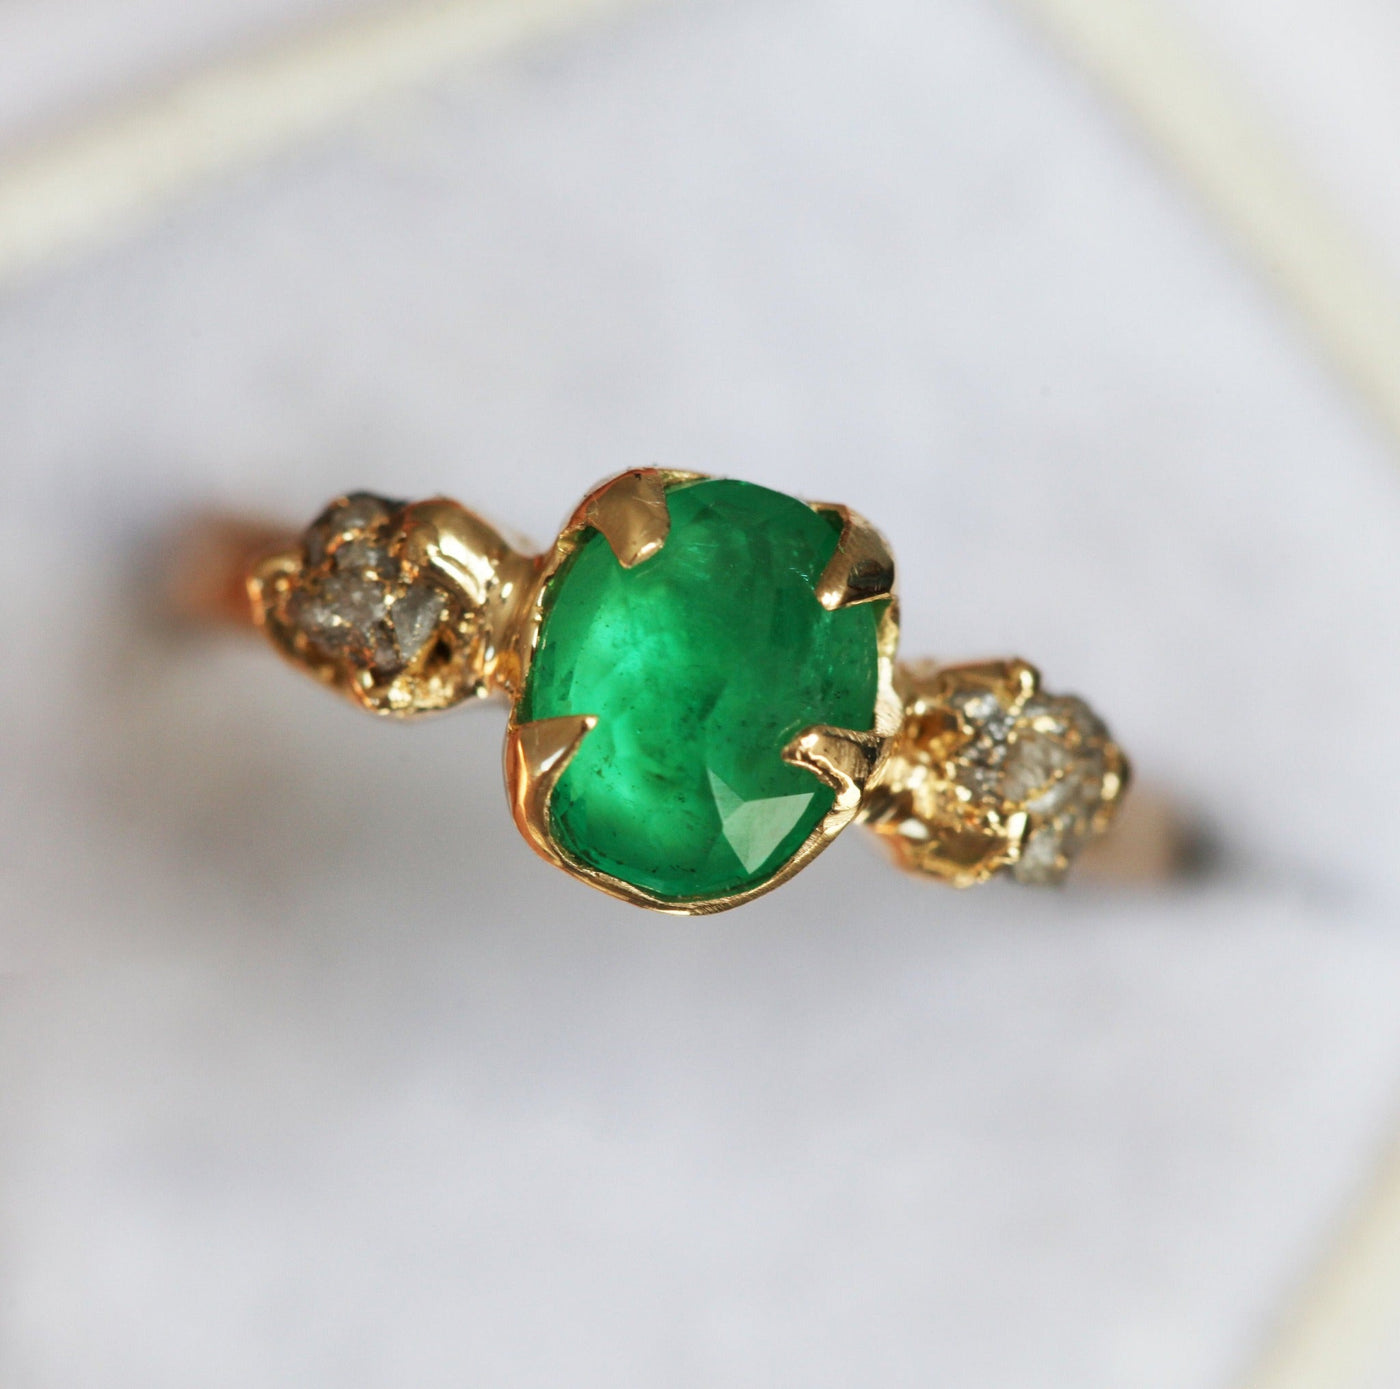 Fancy-Cut Natural Emerald Ring With Raw Diamonds